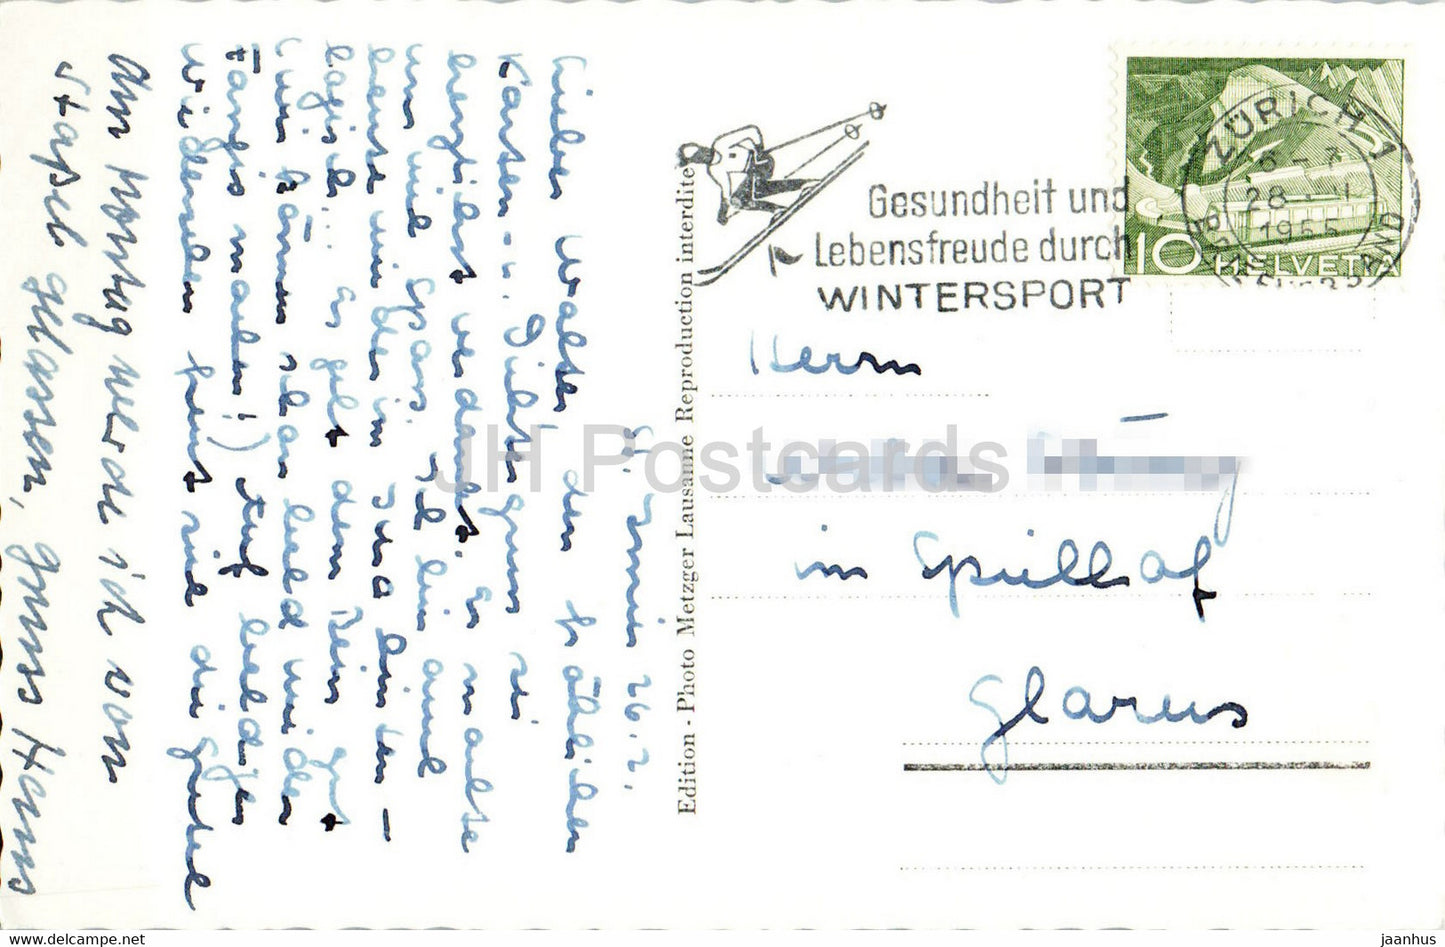 St Imier - Combe Grede et Chasseral - 2661 - carte postale ancienne - 1955 - Suisse - occasion